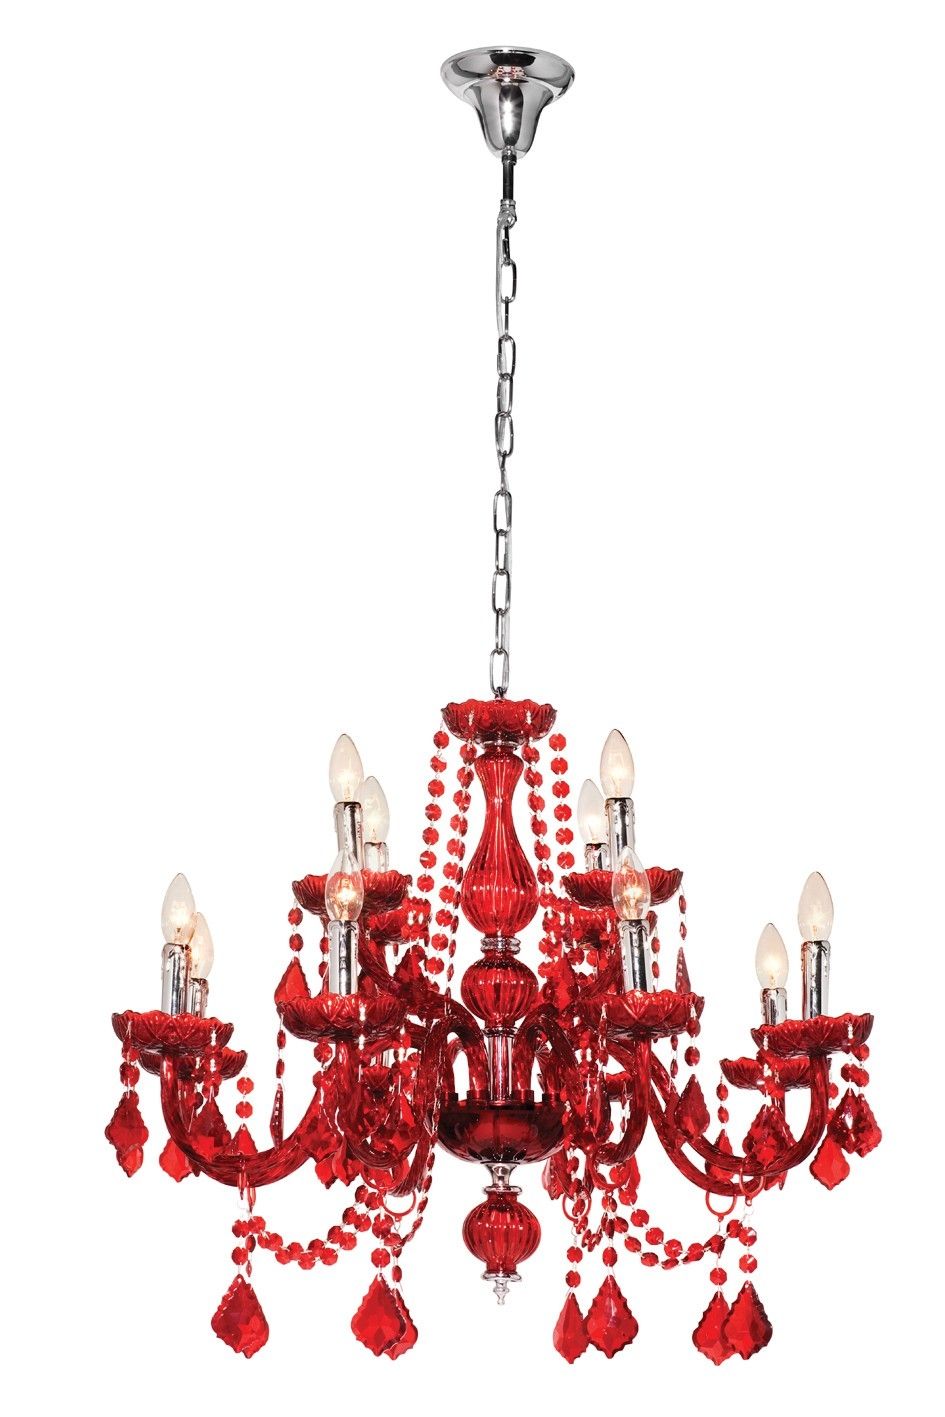 Fair Red Chandelier With Additional Small Home Decoration Ideas Throughout Small Red Chandelier (View 6 of 12)